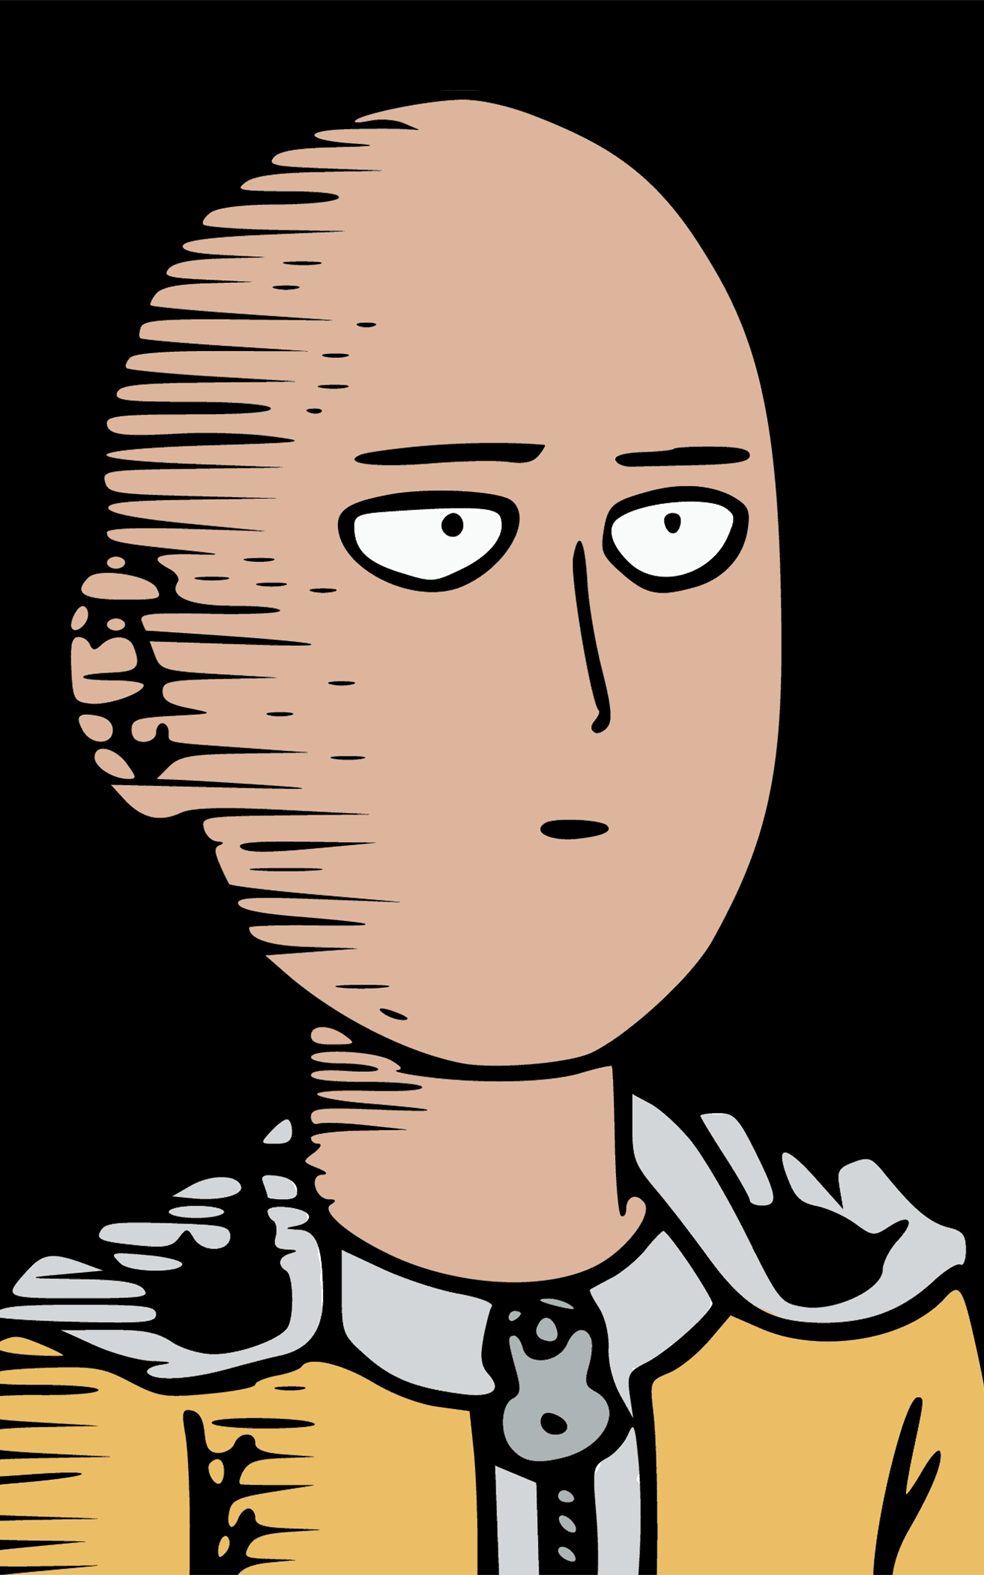 1280x2120 Saitama One Punch Man iPhone 6+ HD 4k Wallpapers, Images,  Backgrounds, Photos and Pictures